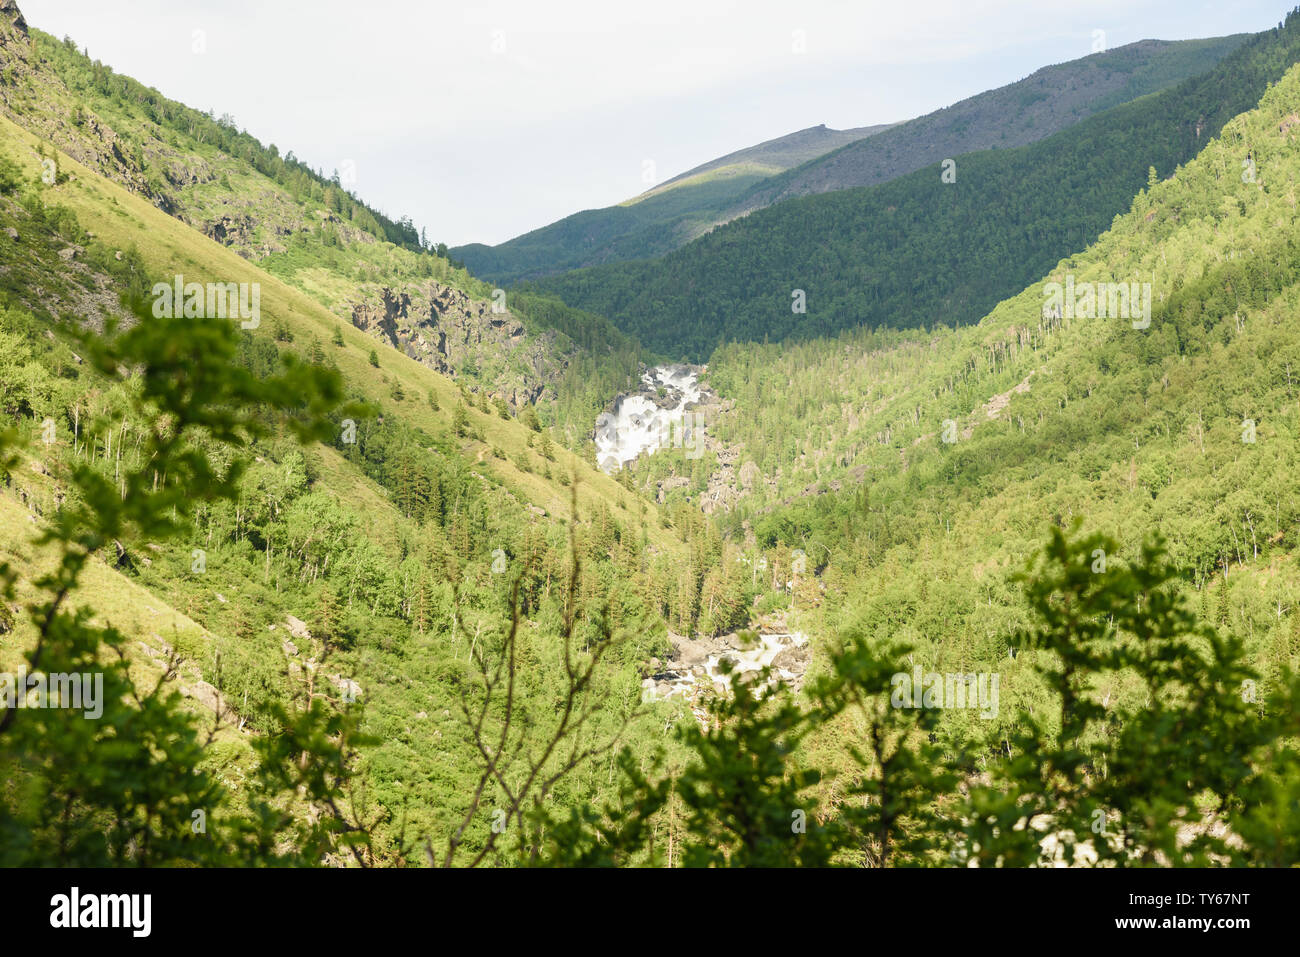 Chulishman valley in mountain Altay the road to Uchar Stock Photo